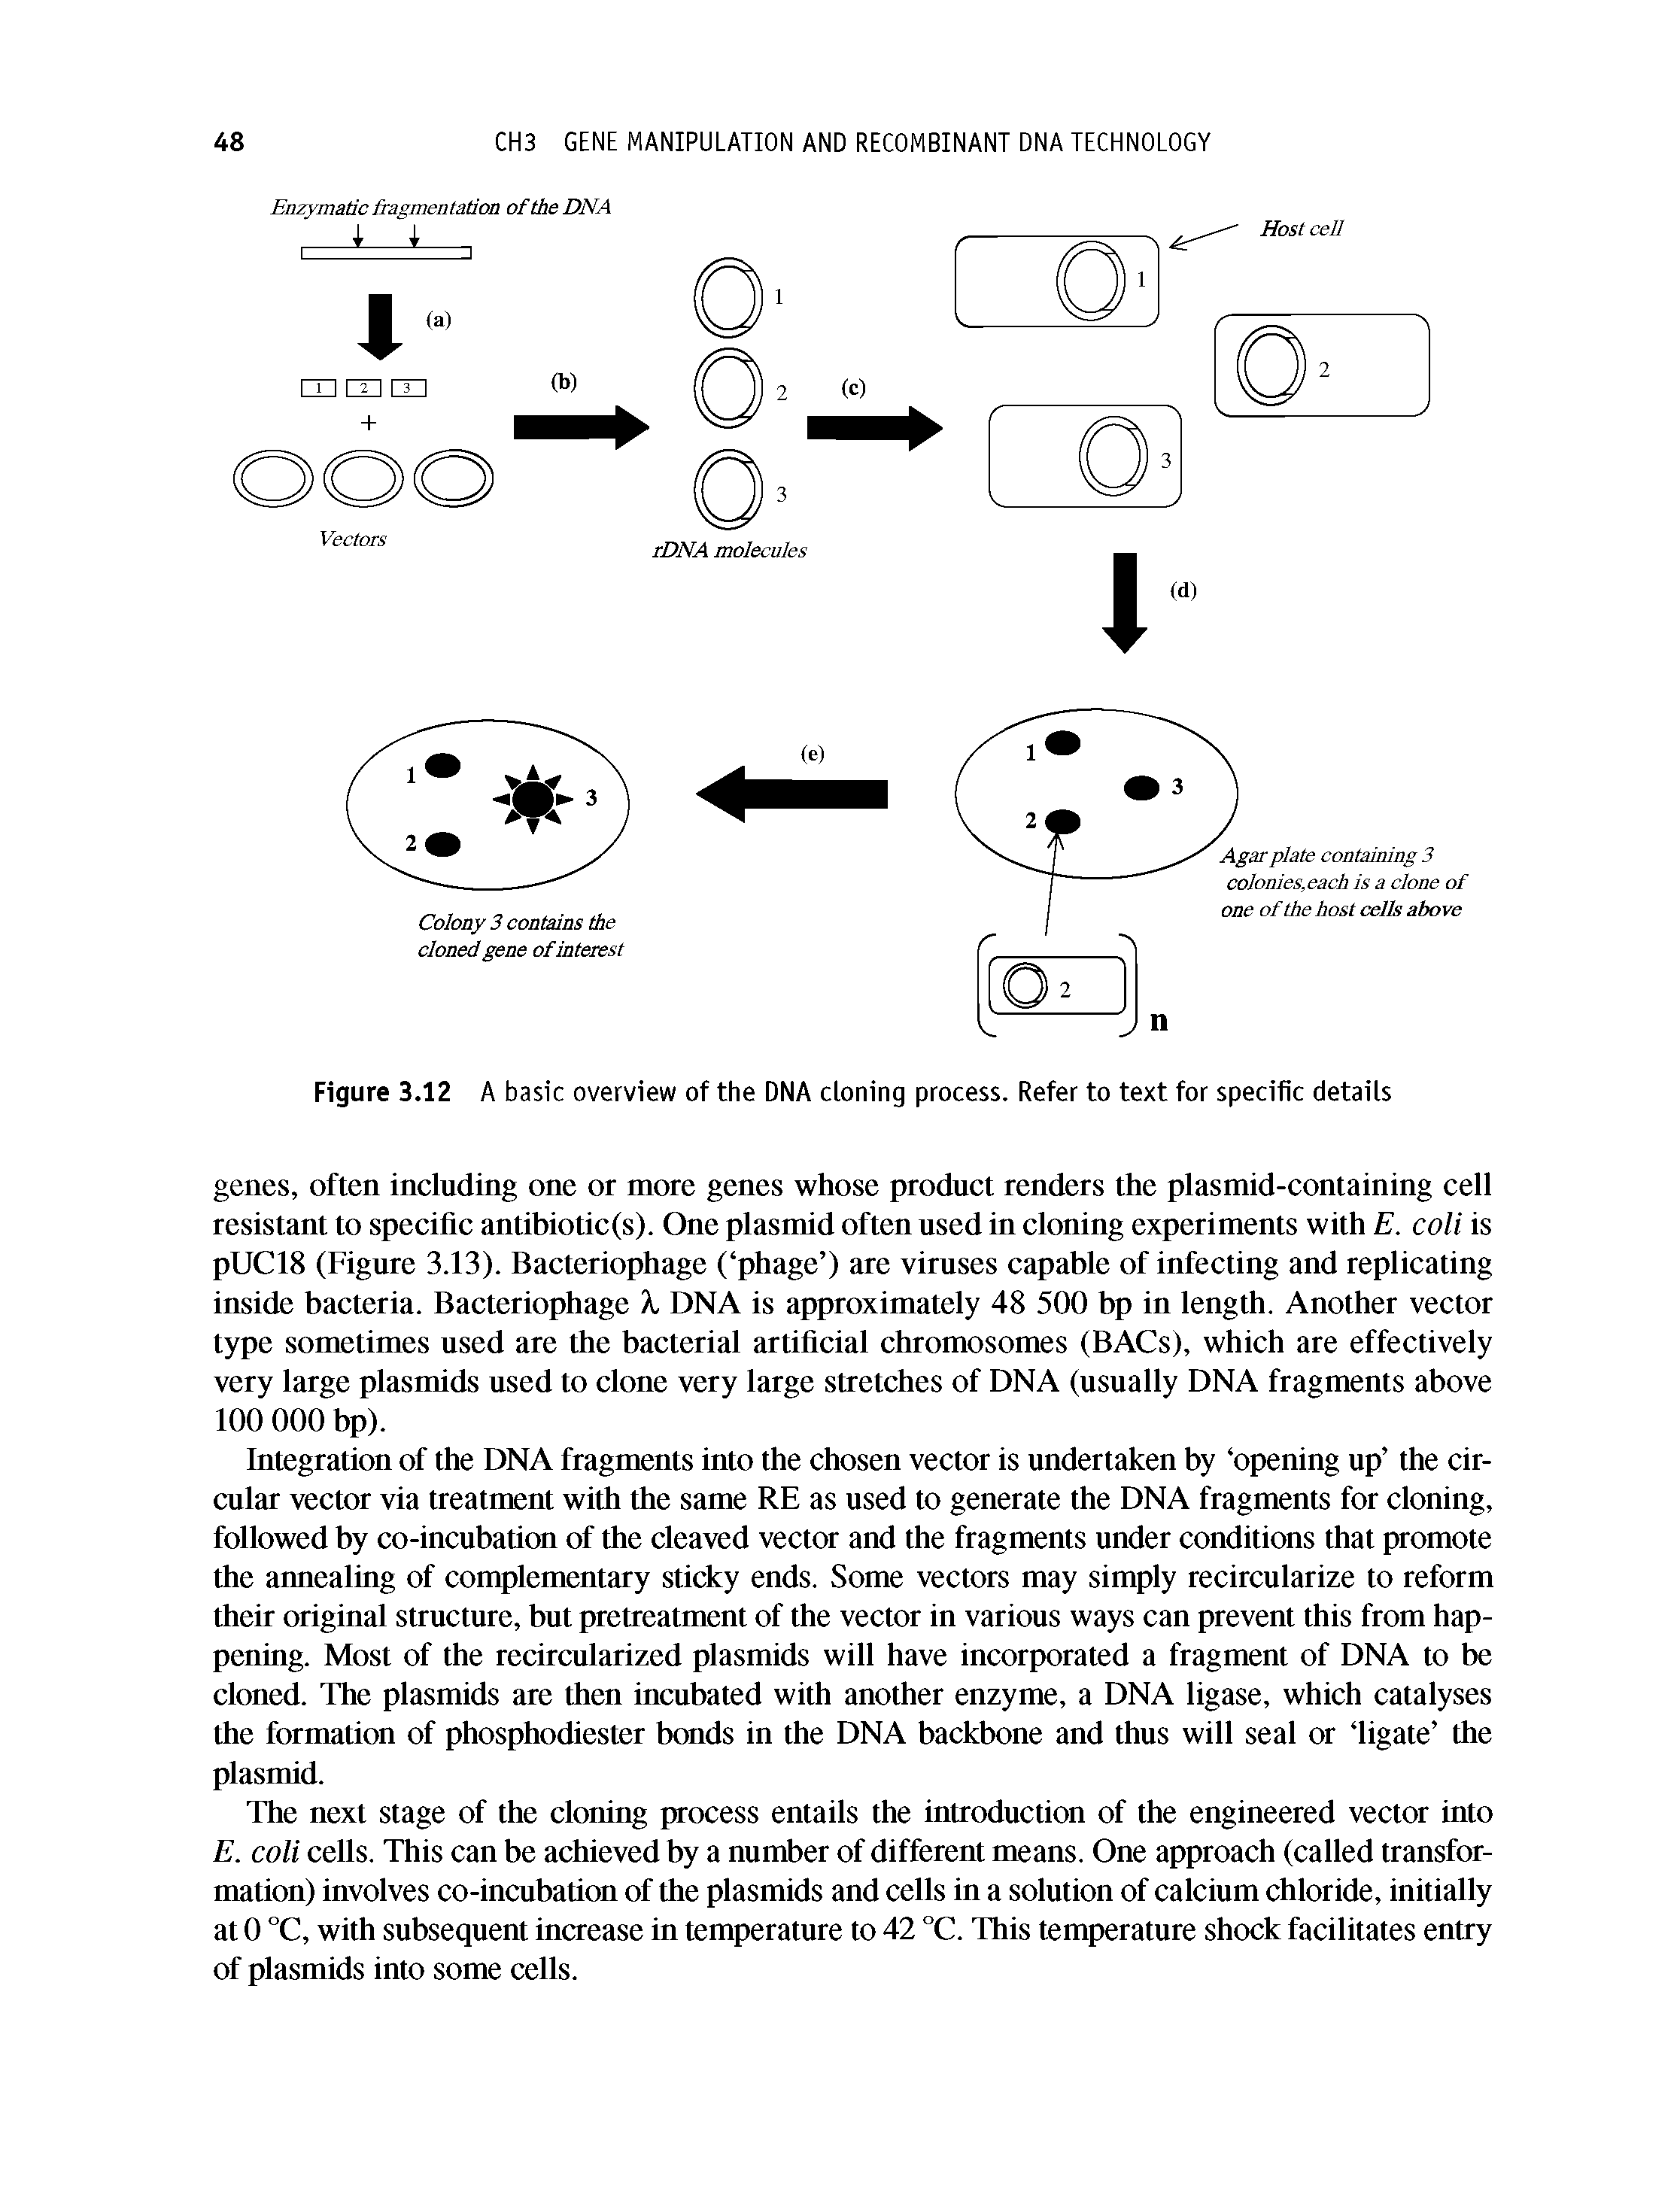 Figure 3.12 A basic overview of the DNA cloning process. Refer to text for specific details...